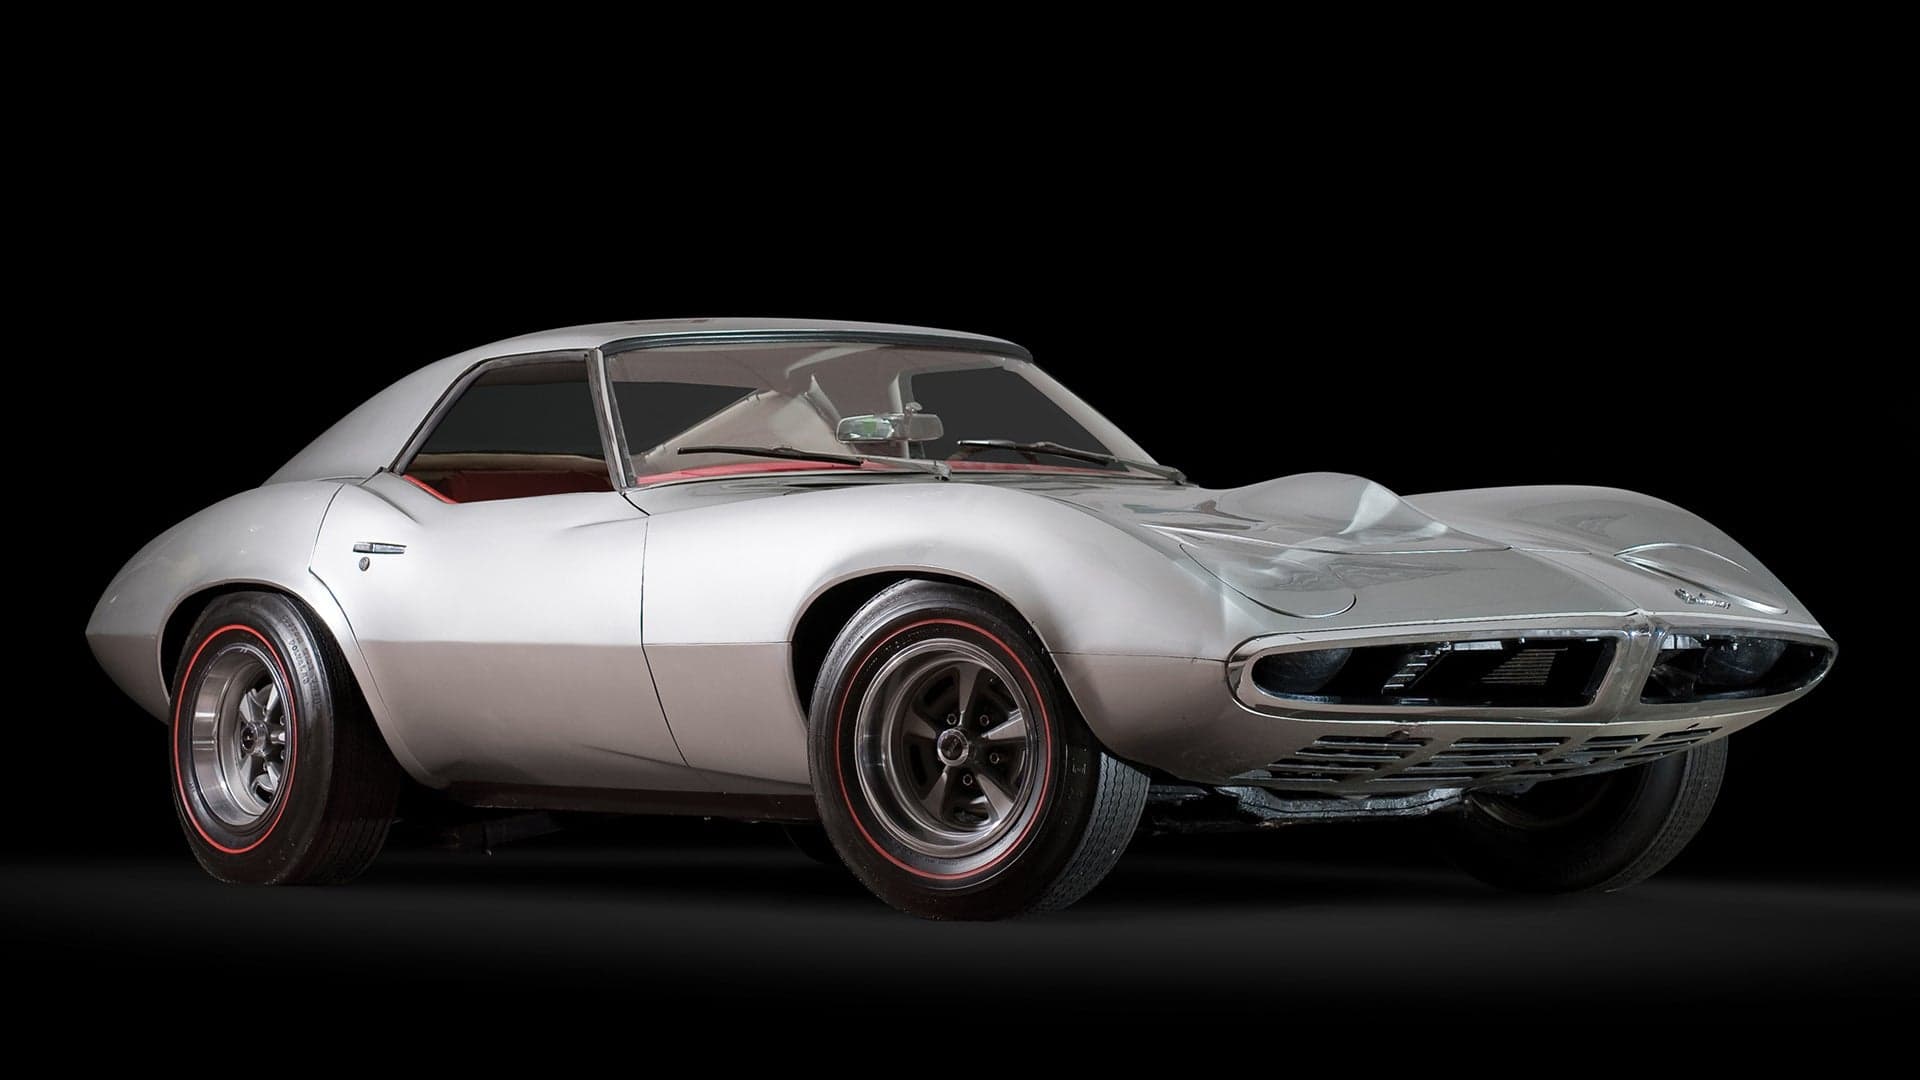 The Doomed 1965 Pontiac Banshee XP-833 Was the Beginning of the End for Pontiac